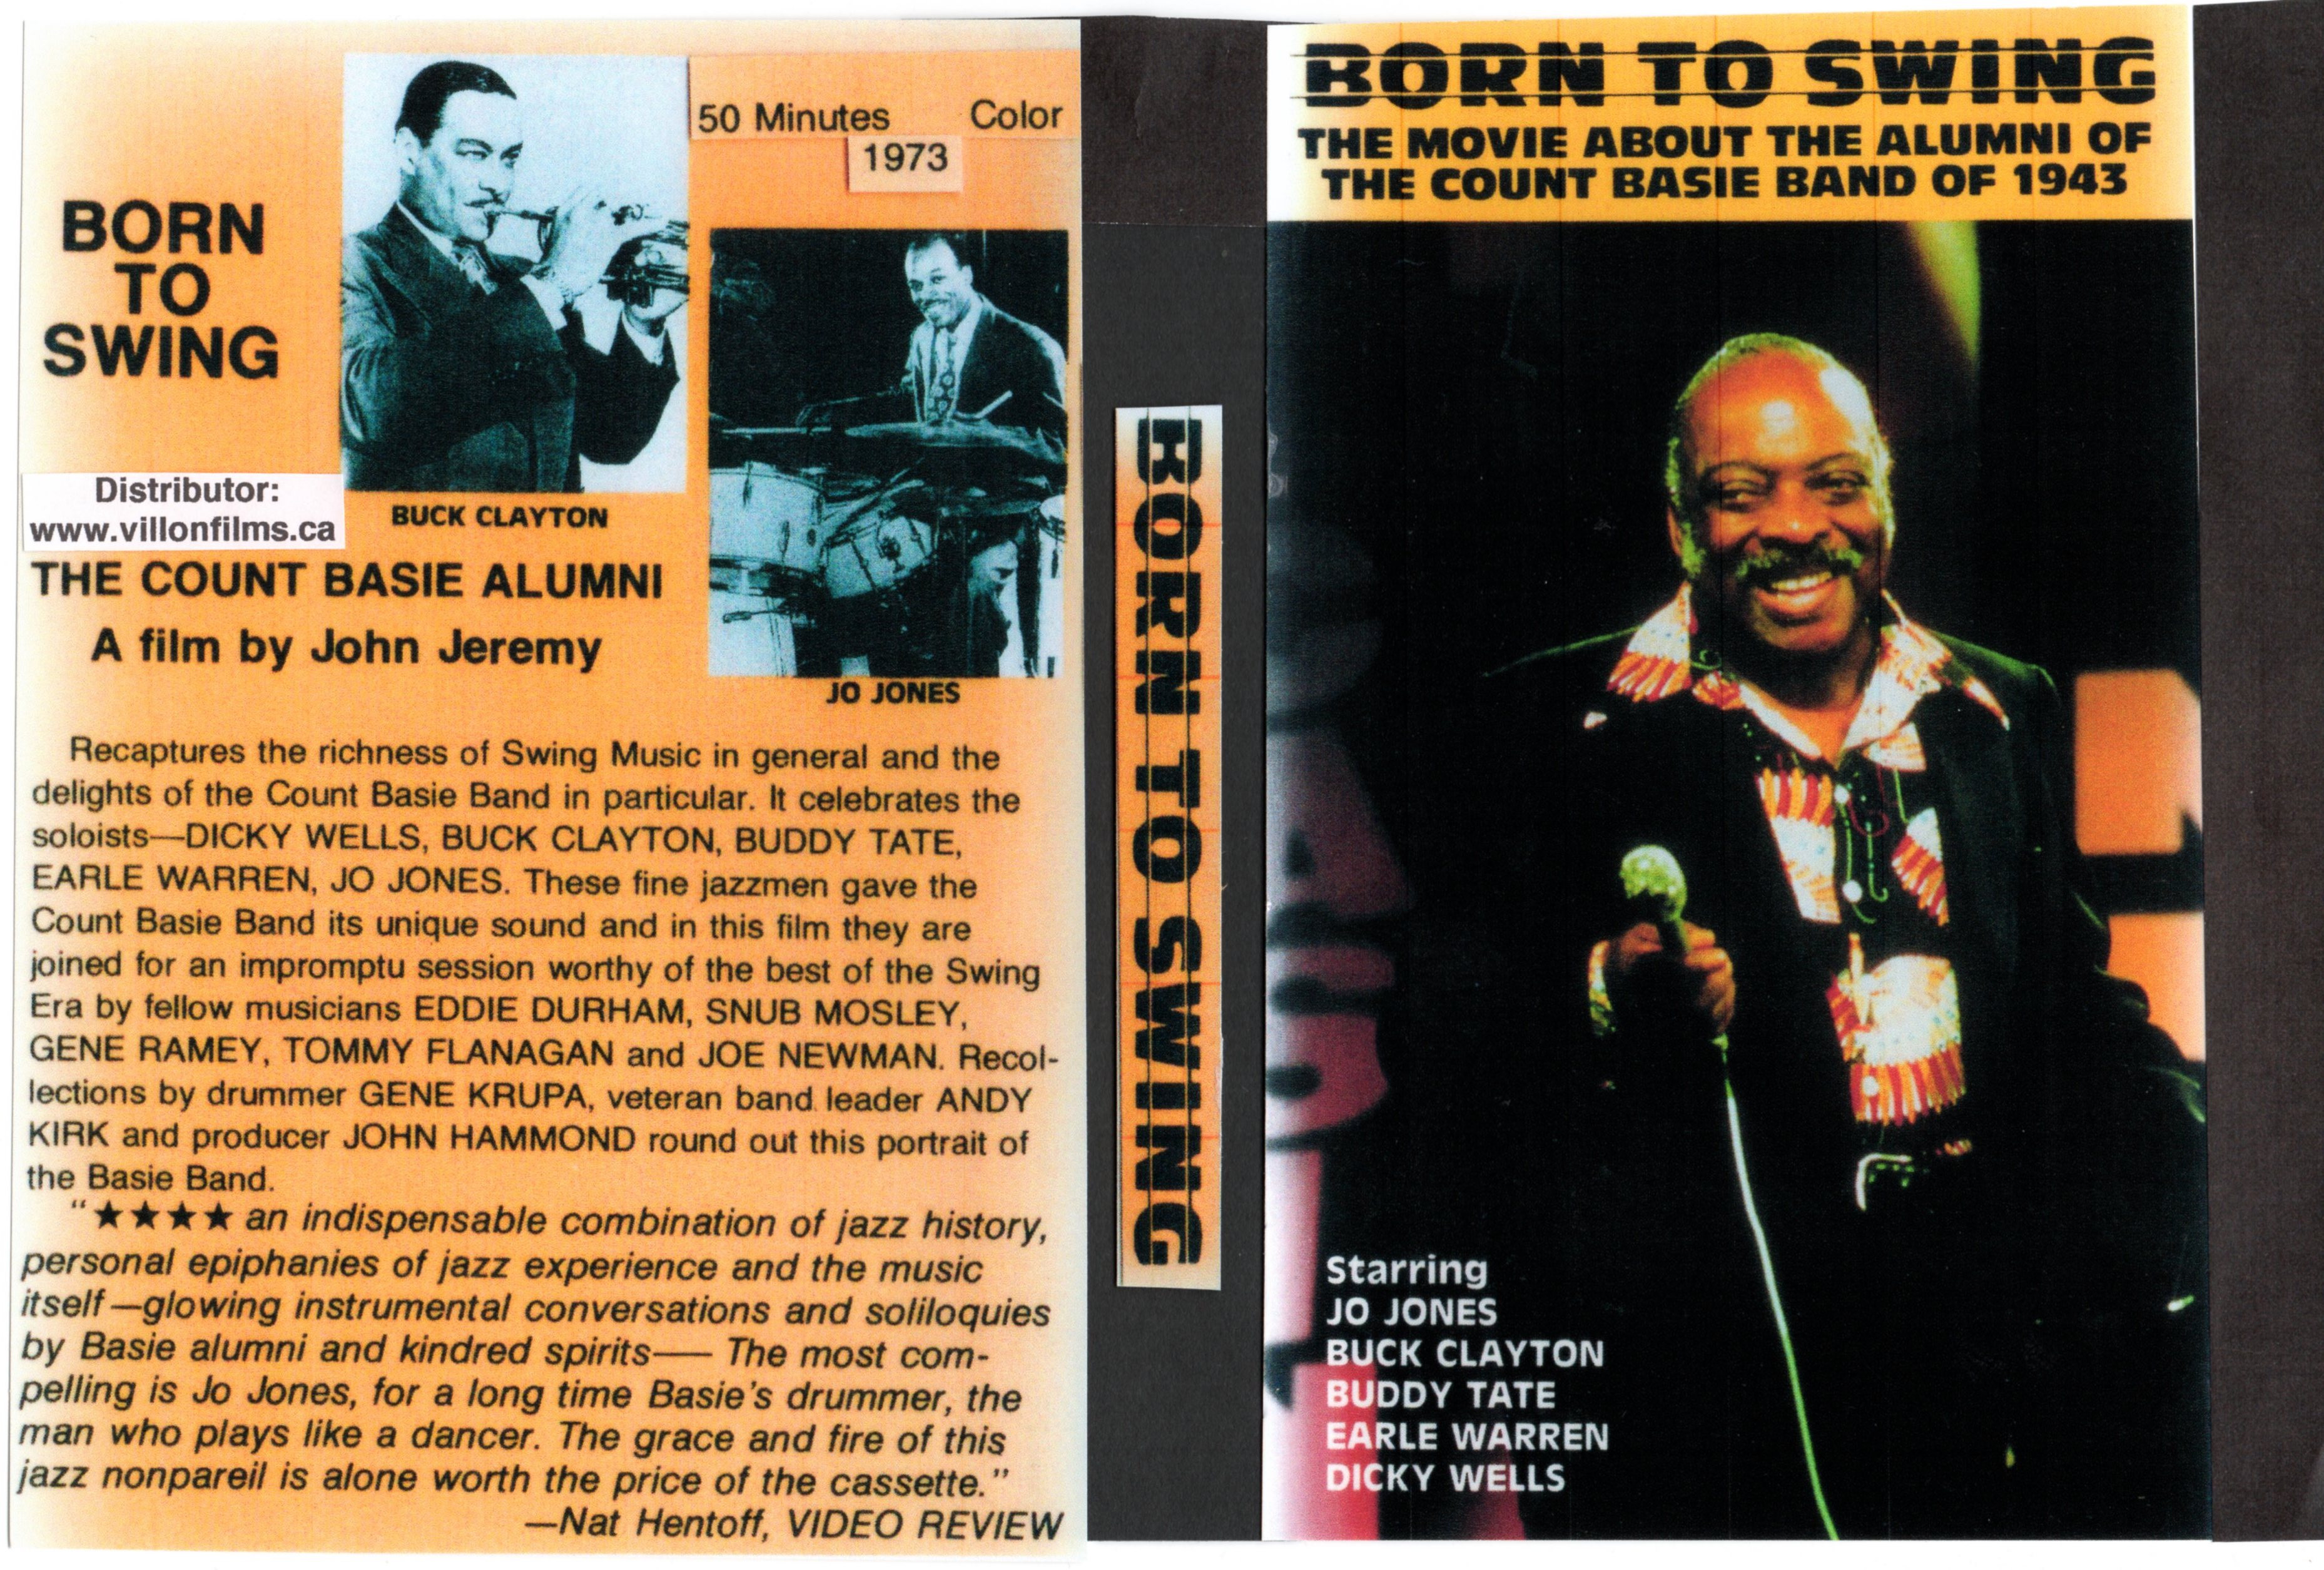 Born To Swing! - VHS Sleeve.